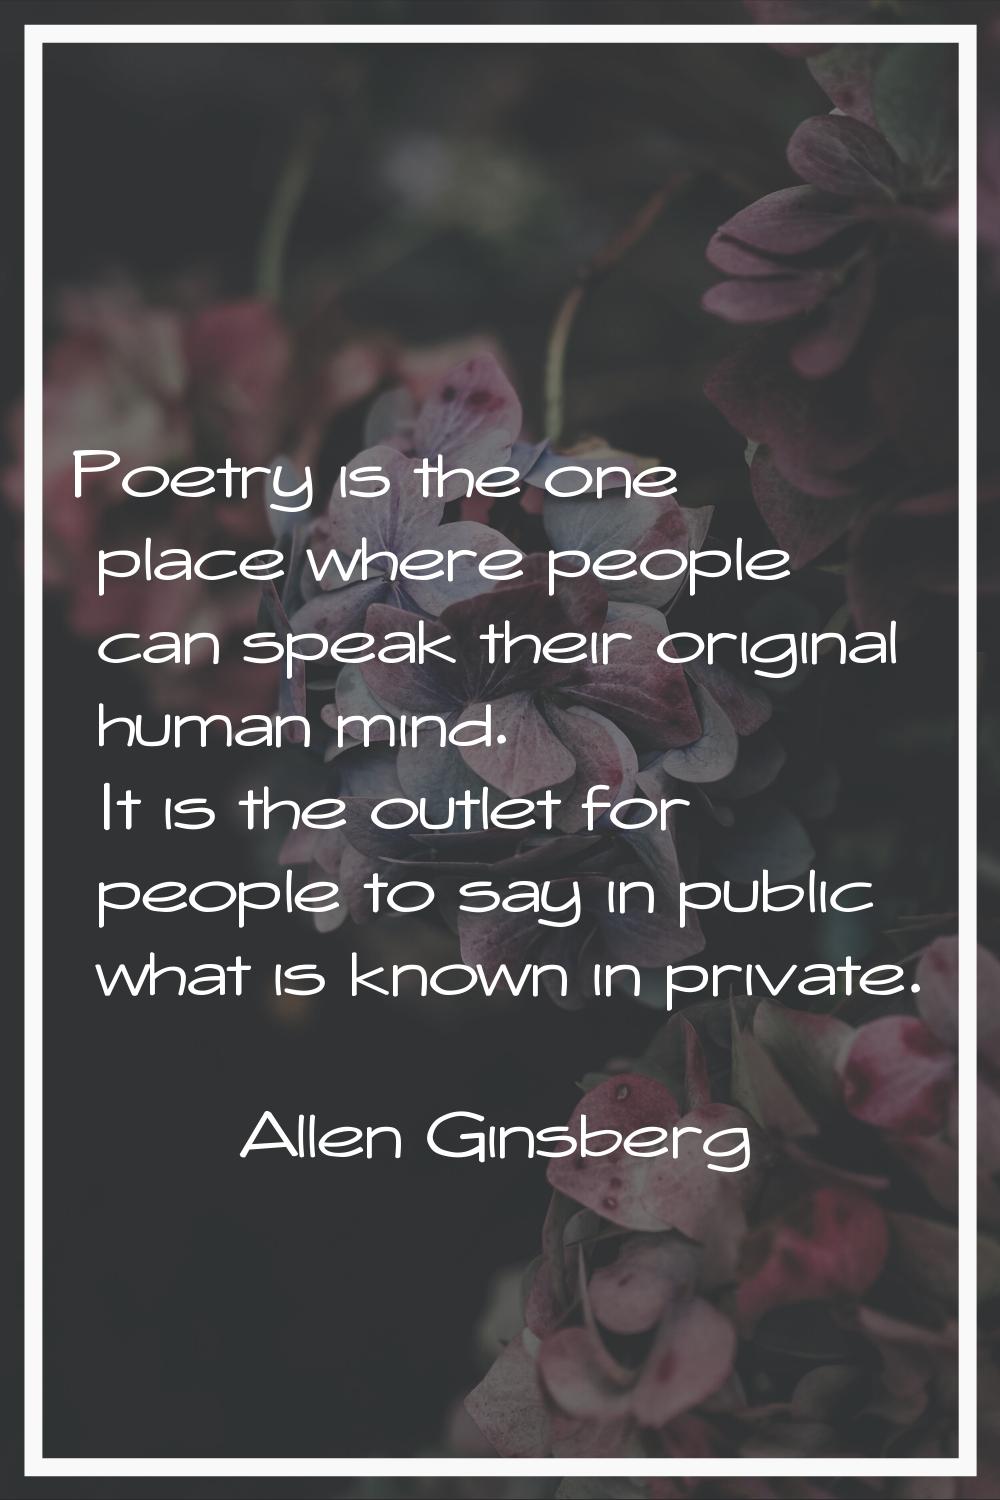 Poetry is the one place where people can speak their original human mind. It is the outlet for peop